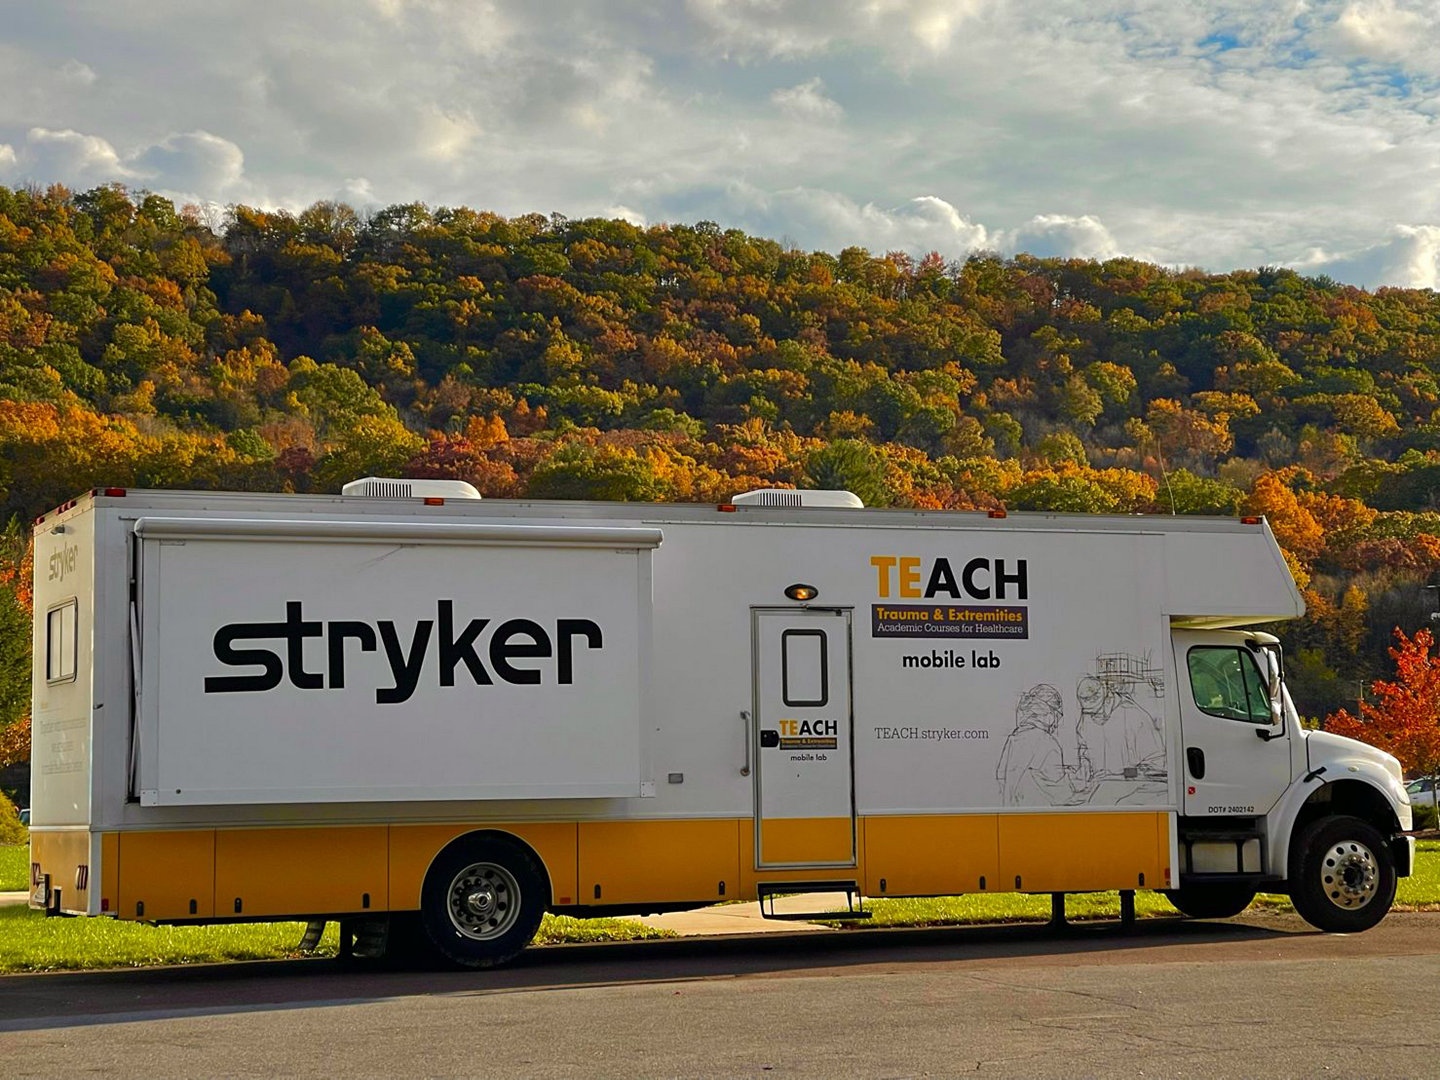 Mobile education specialist, Christopher, snaps a shot of the TEACH mobile lab at its destination in Danville, PA.